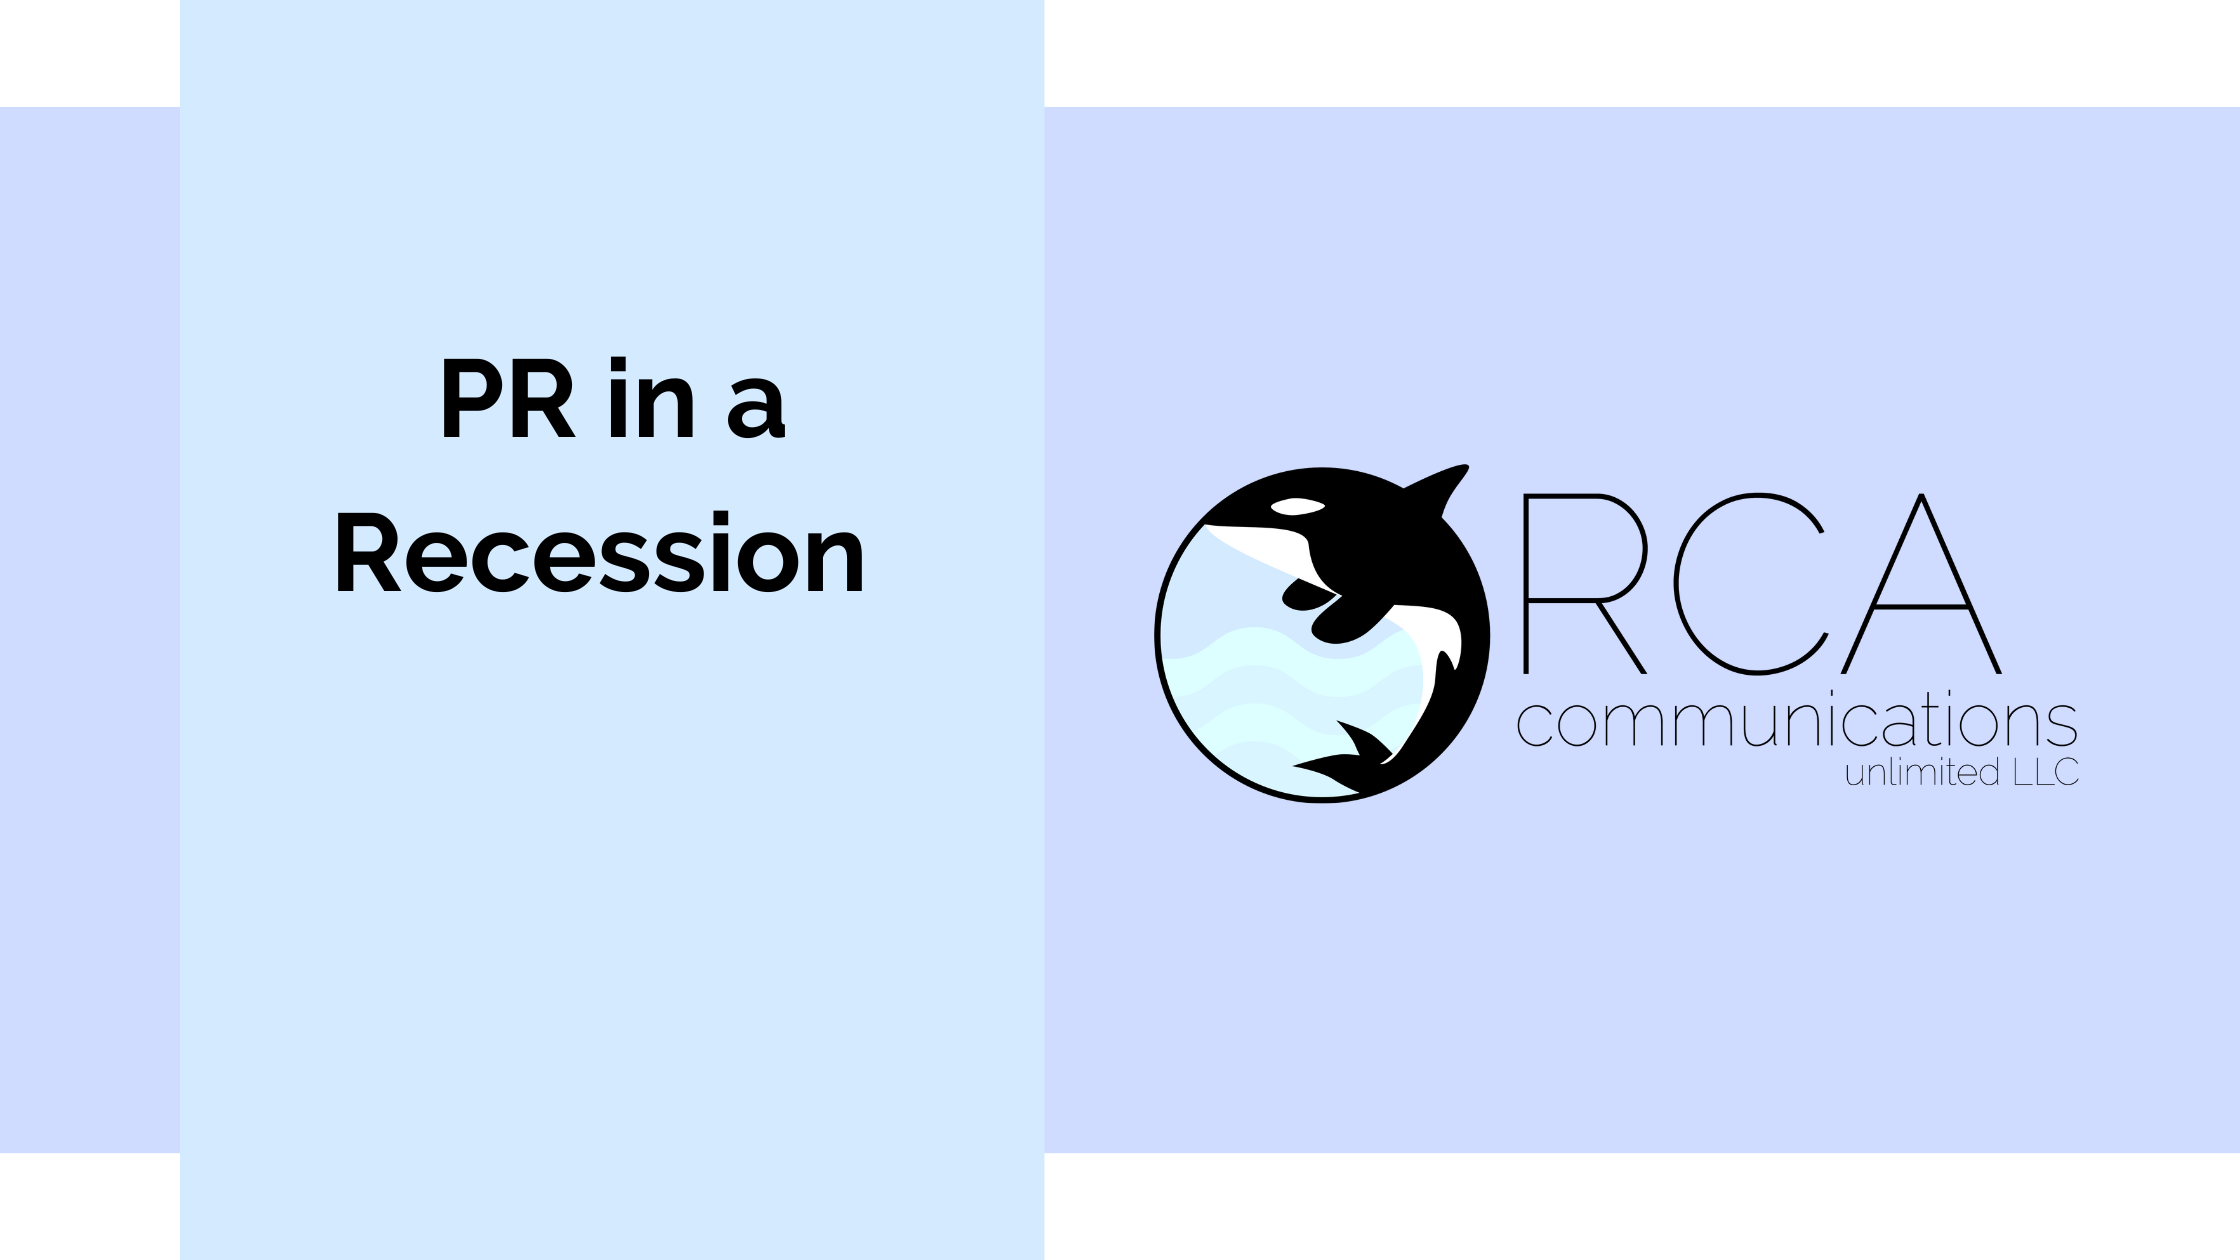 PR in a recession Orca Communications